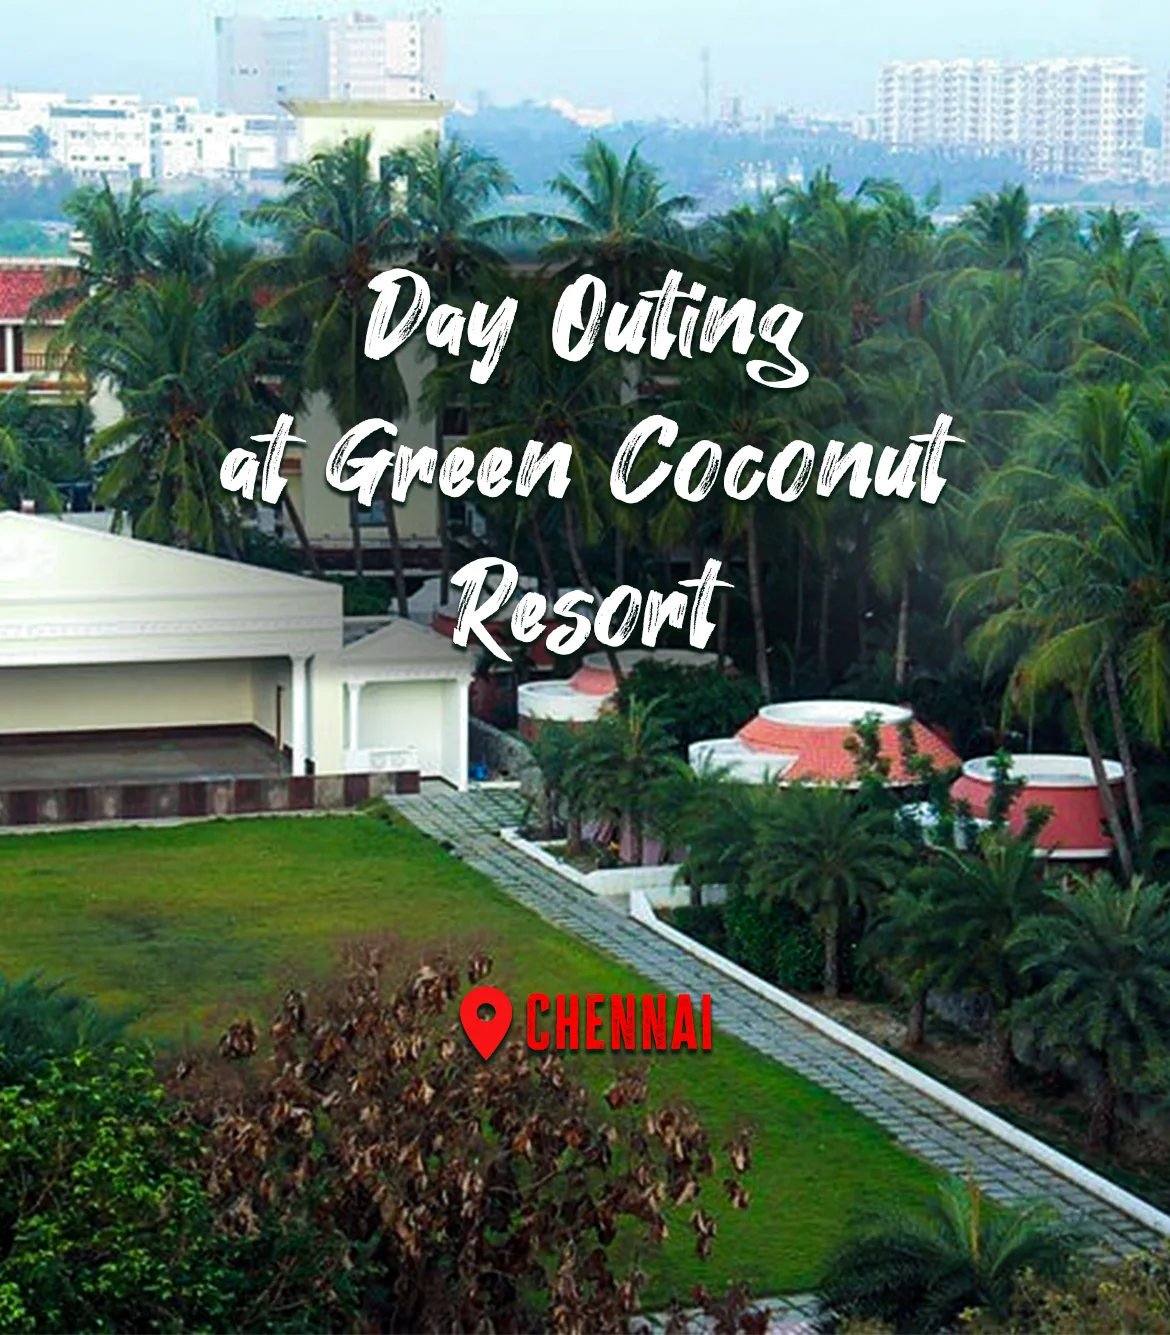 Day Outing at Green Coconut Resort